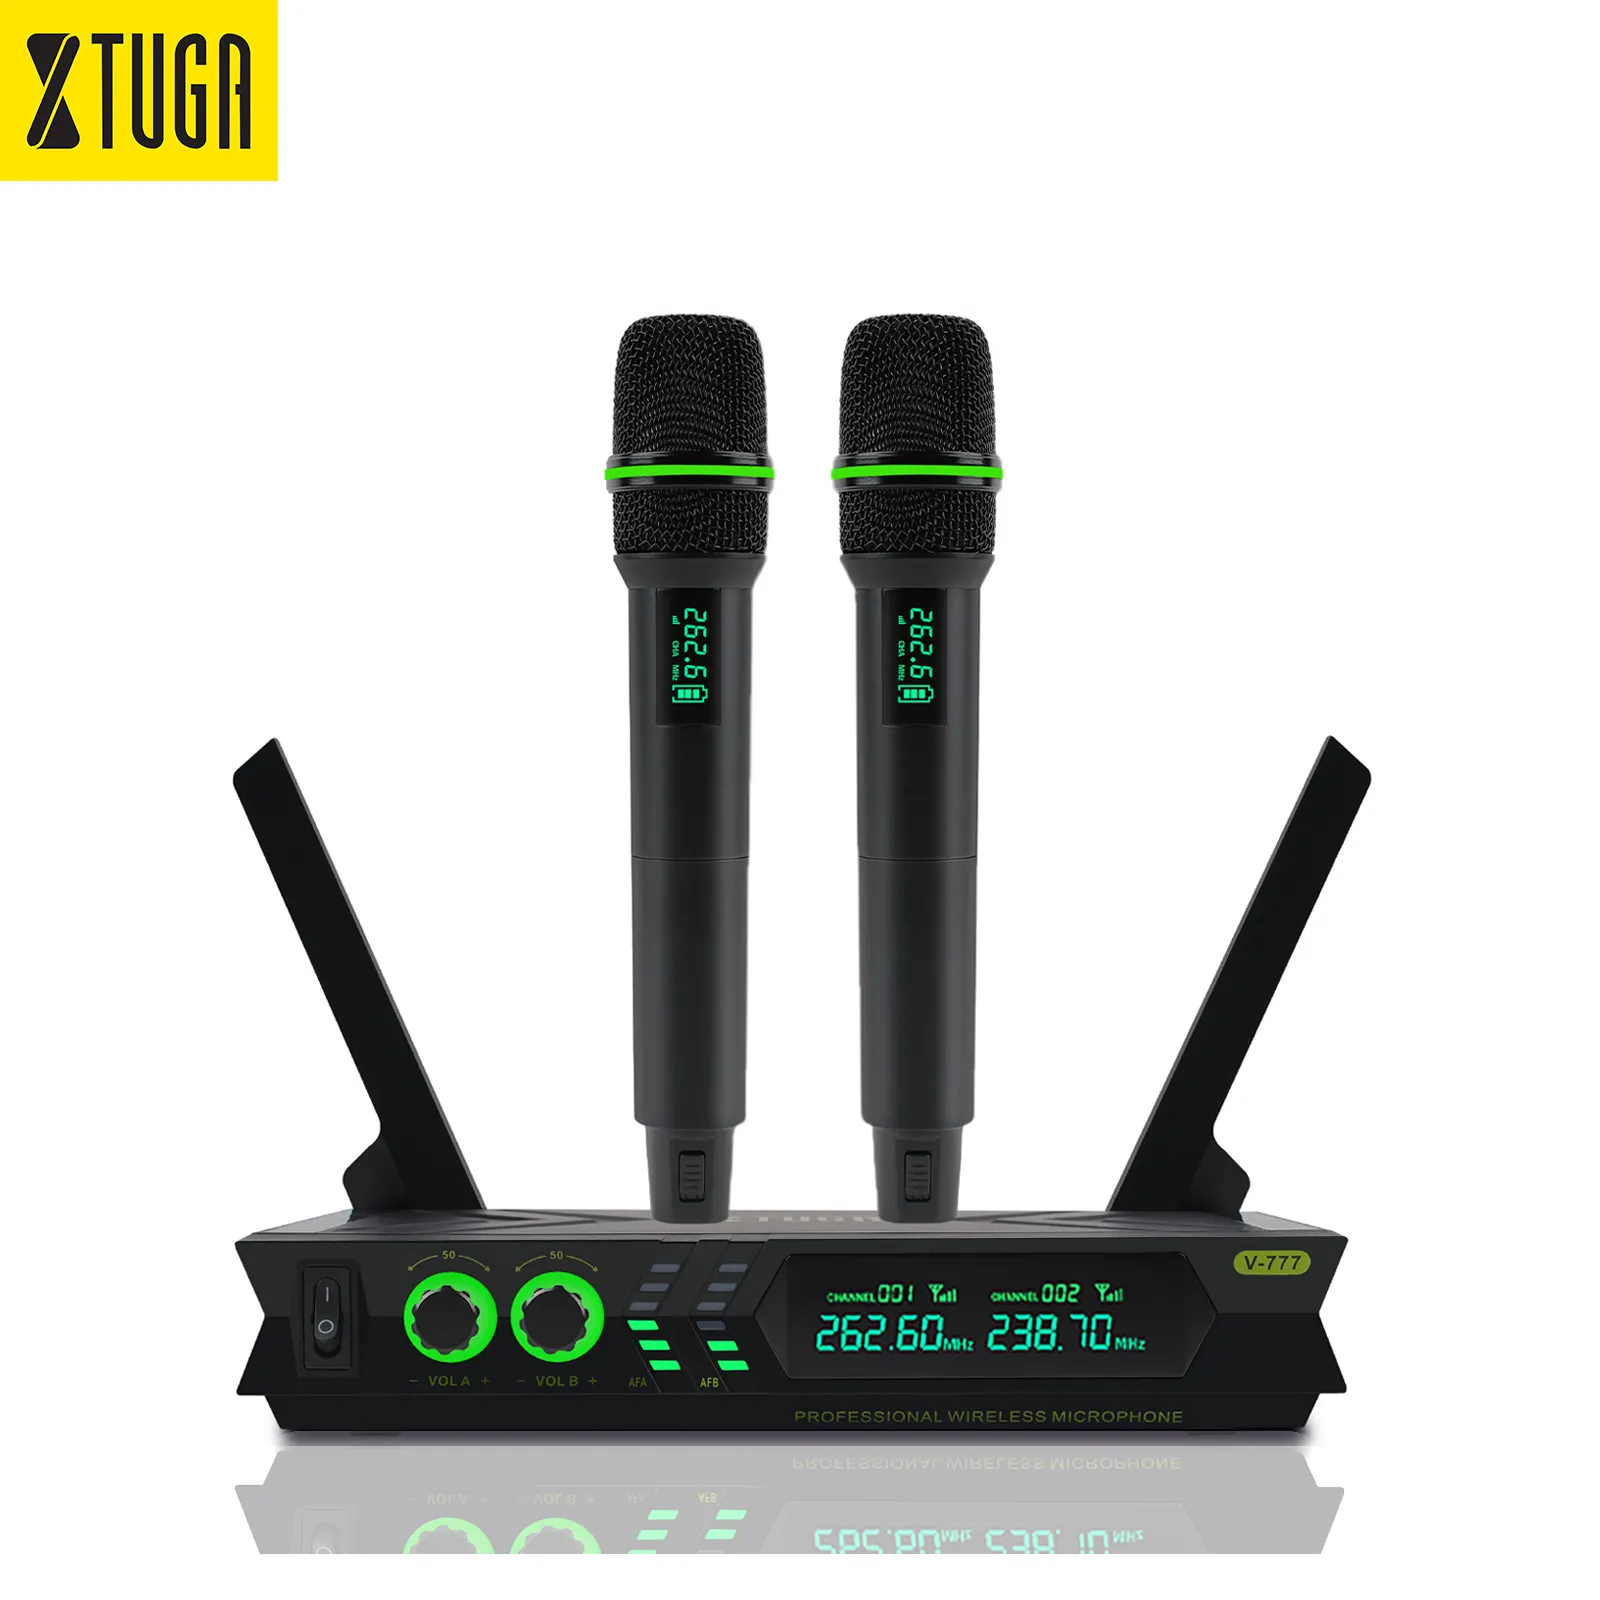 XTUGA Brand V777 Dual Channels Vocal Mic Cordless Microfone Dynamic Handheld Wireless Microphone For Home